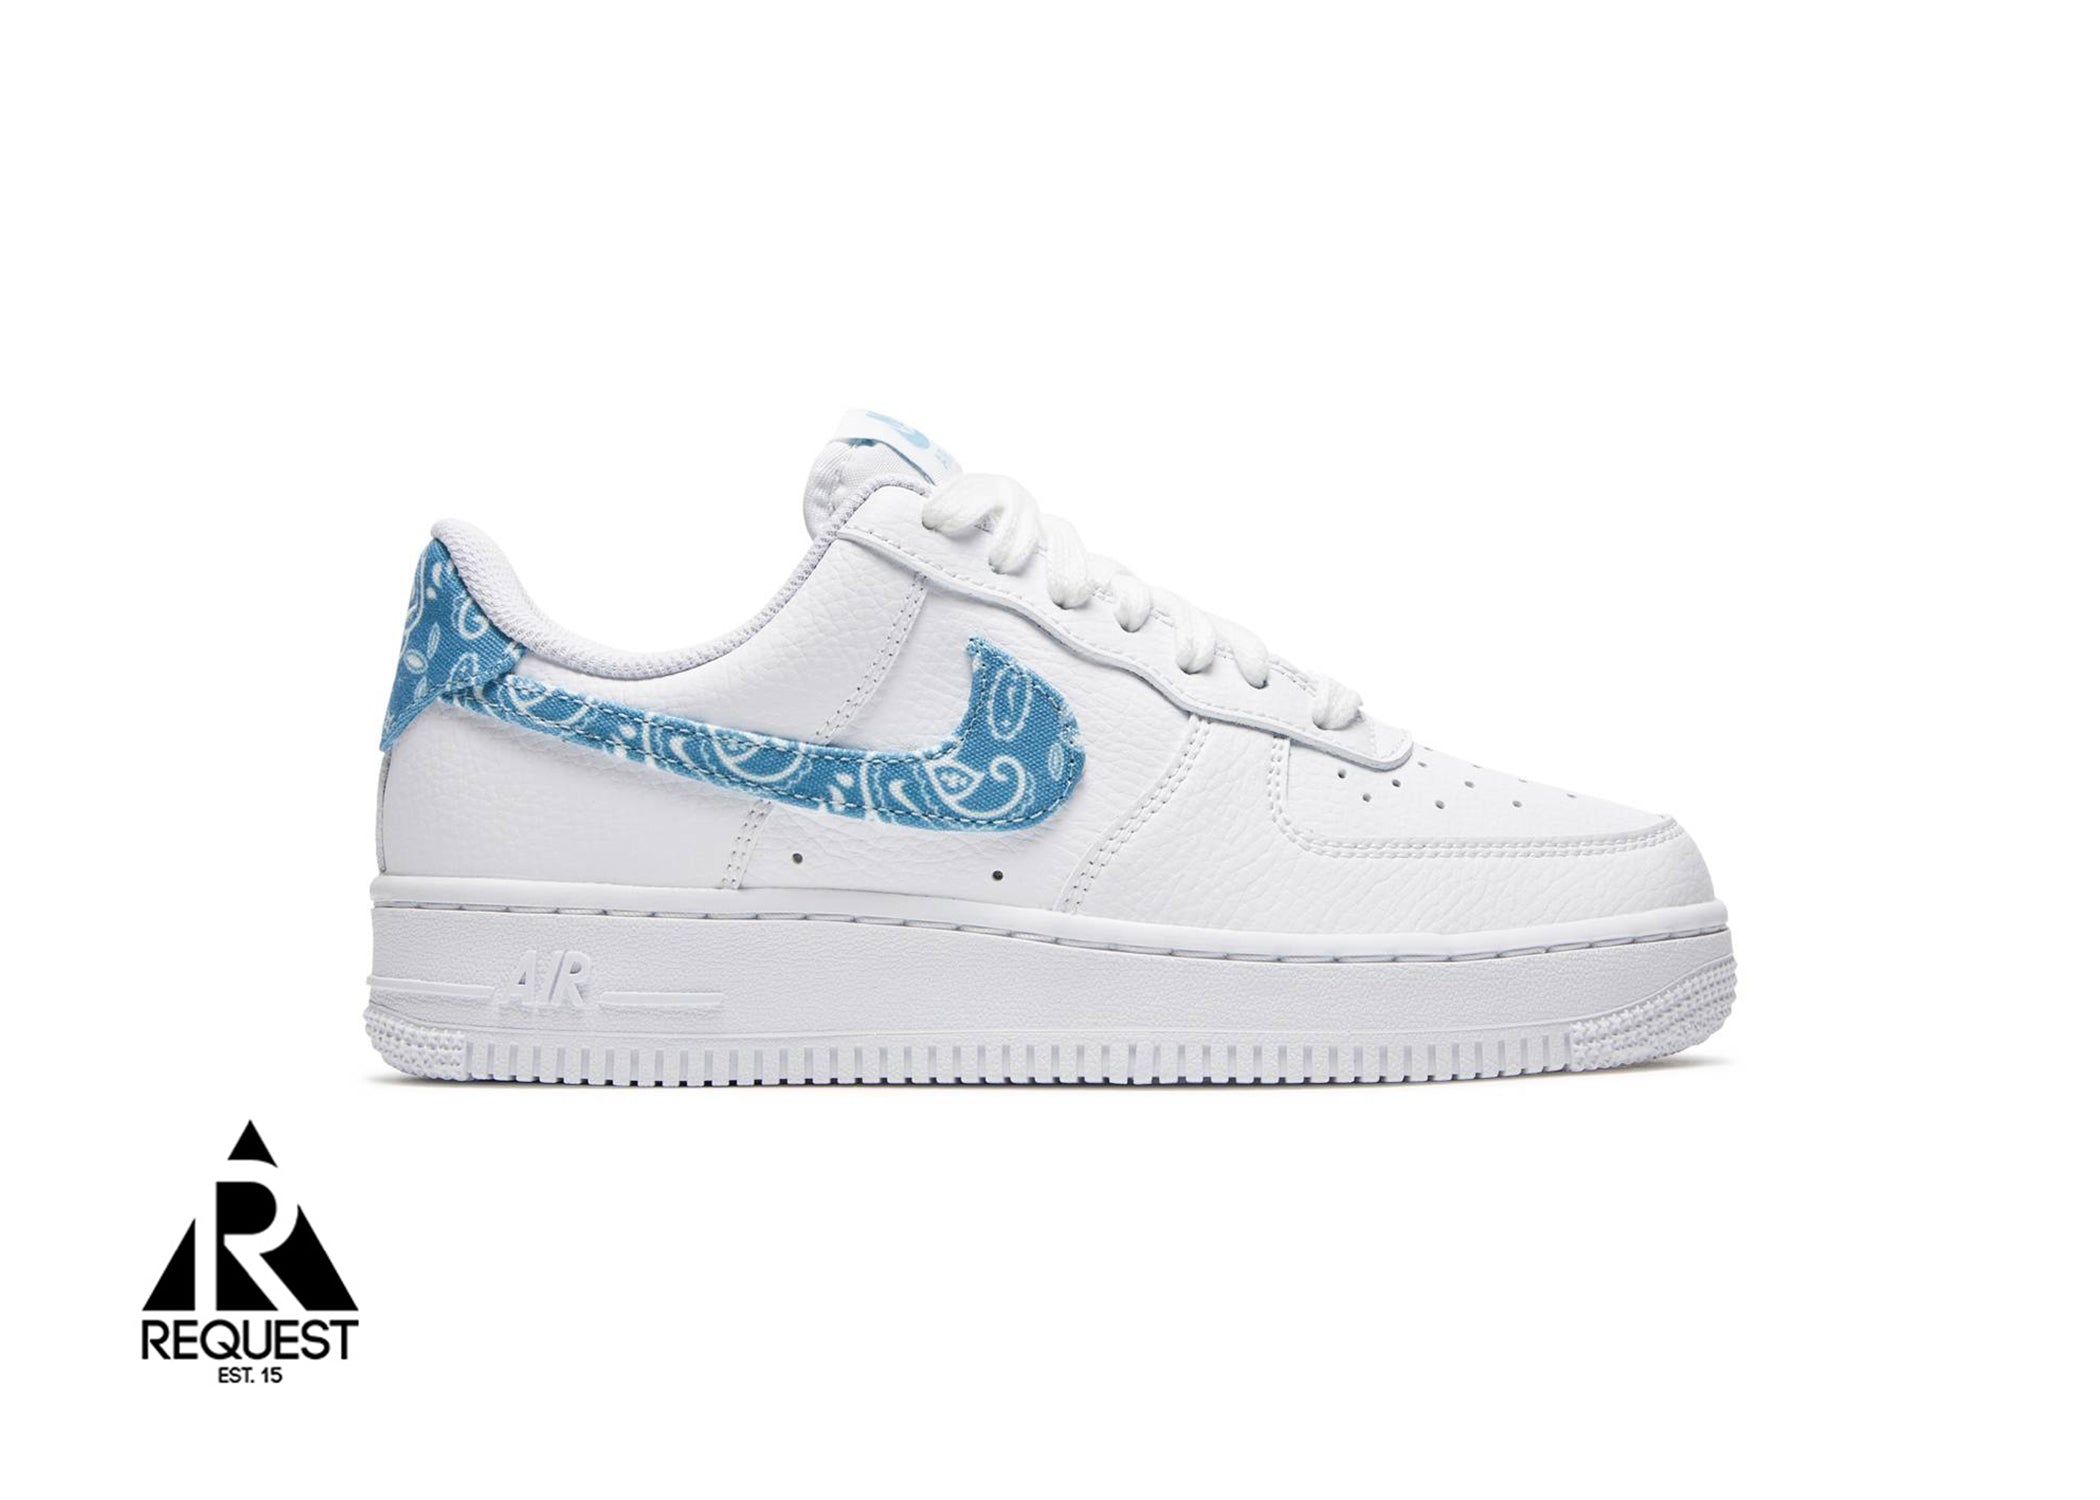 Nike Air Force 1 Low '07 Essential "White Worn Blue Paisley (W)"